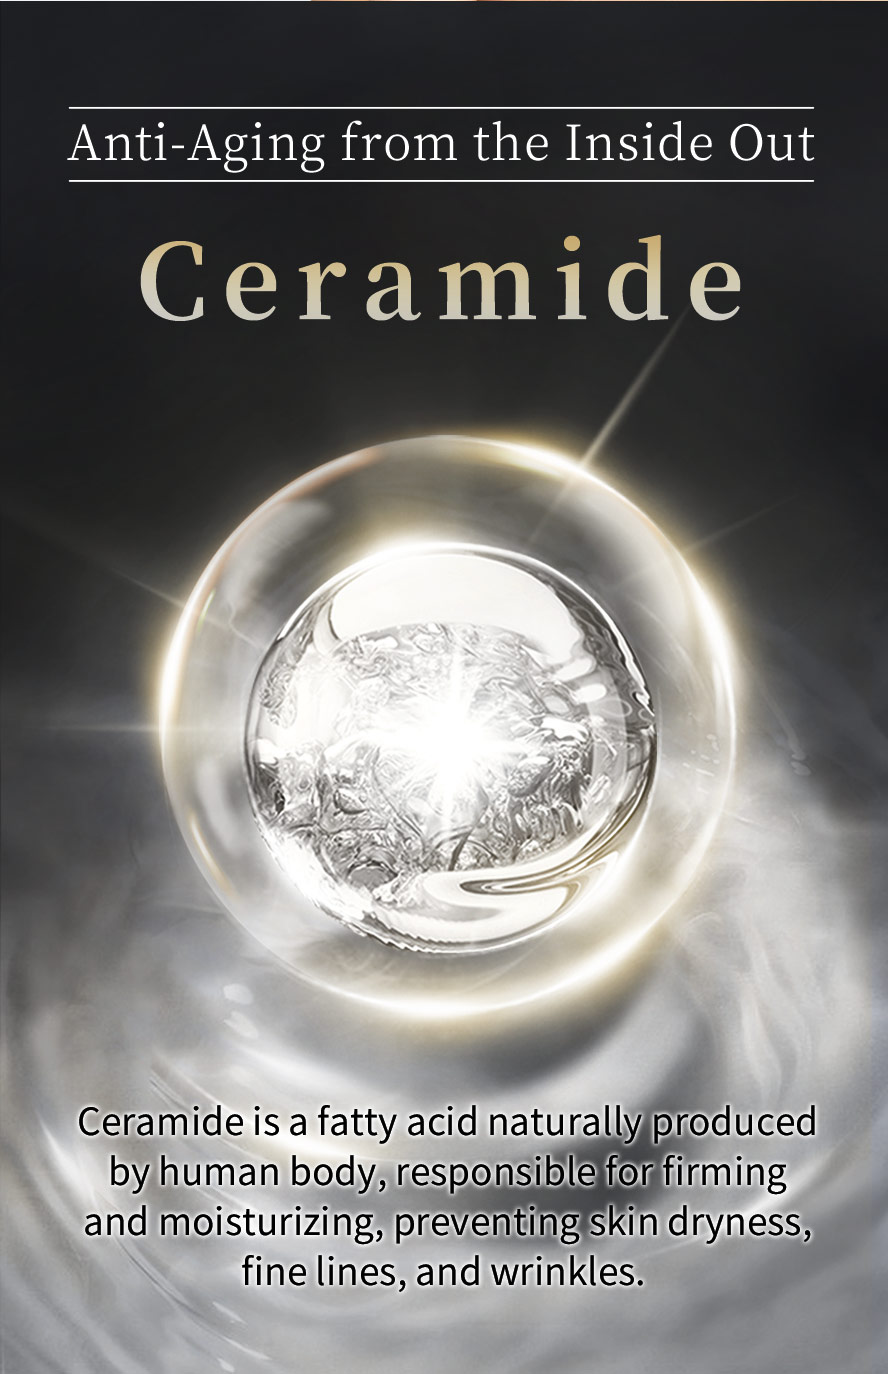 BHK's Ceramide reduce the appearance of fine lines and other signs of aging.